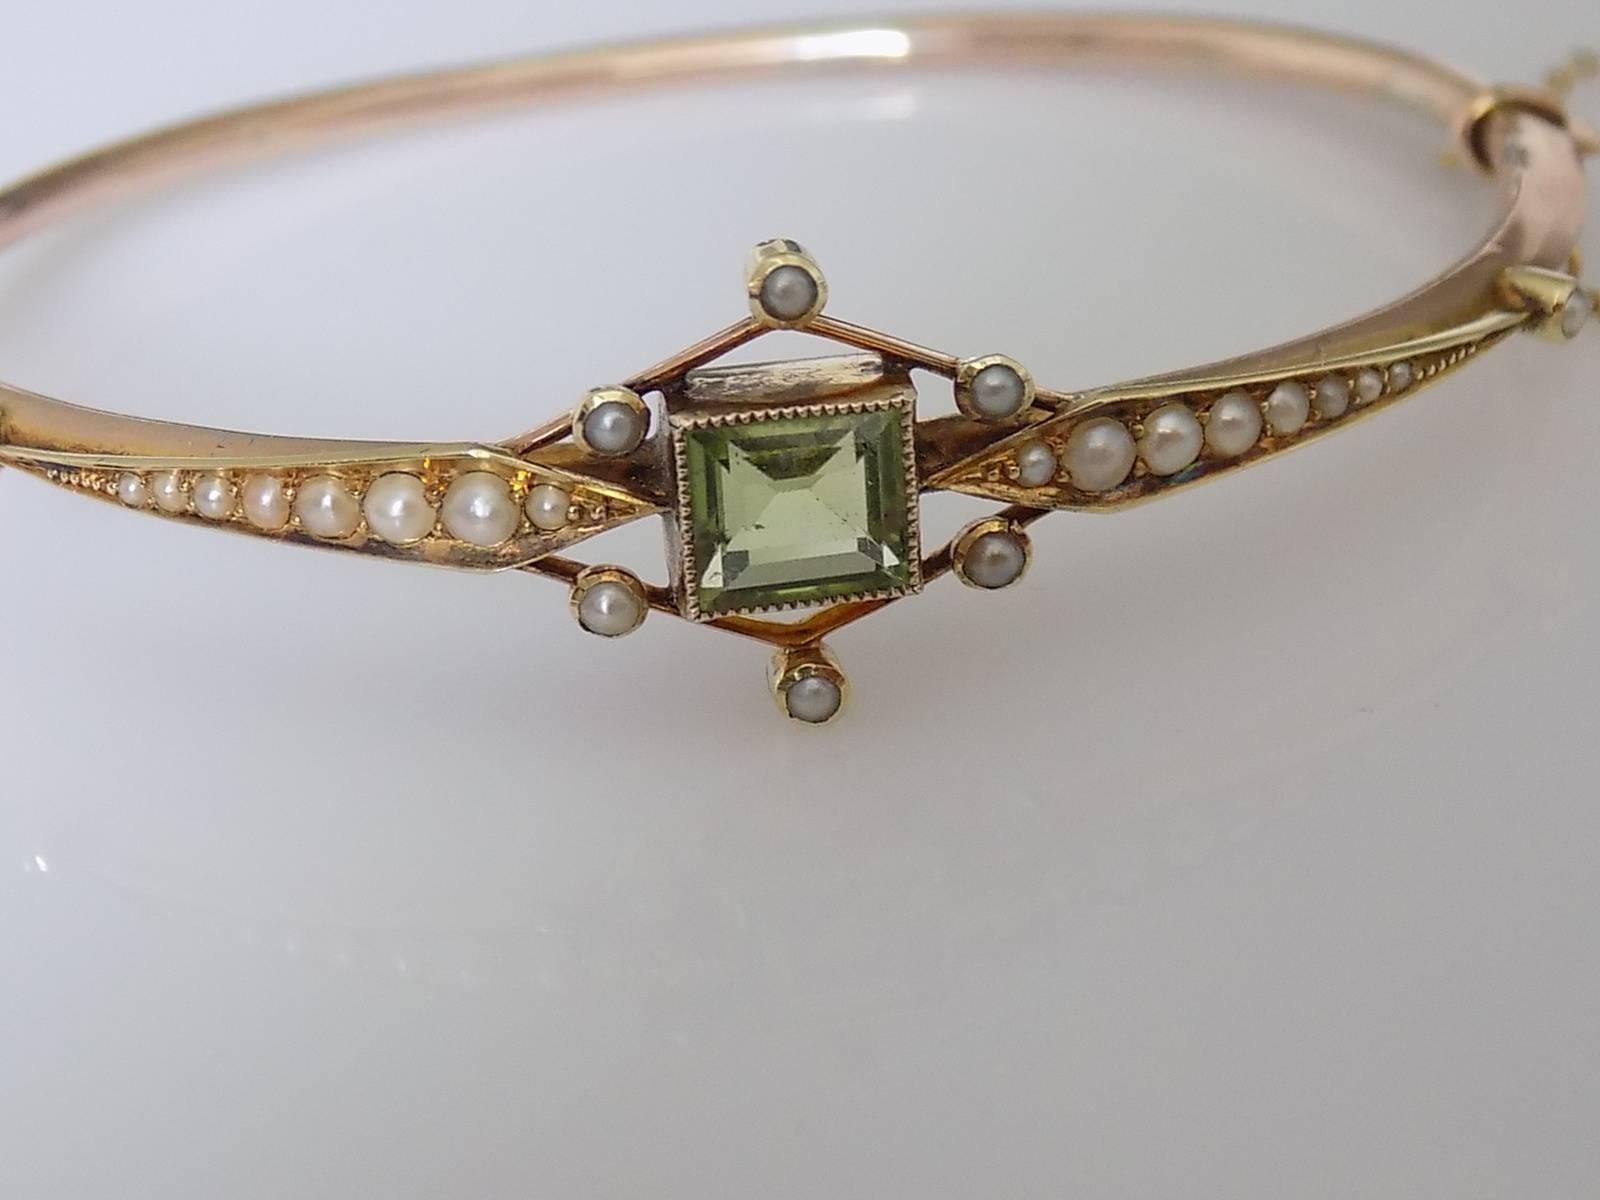 A Gorgeous Edwardian c.1907 9 Carat Gold, Peridot and split seed Pearl Bangle. Bangle complete with working "push in" clasp and safety chain. English origin.
Height of the face 17mm.
Diameter inside of the bangle 60mm x 50mm.
Full Chester